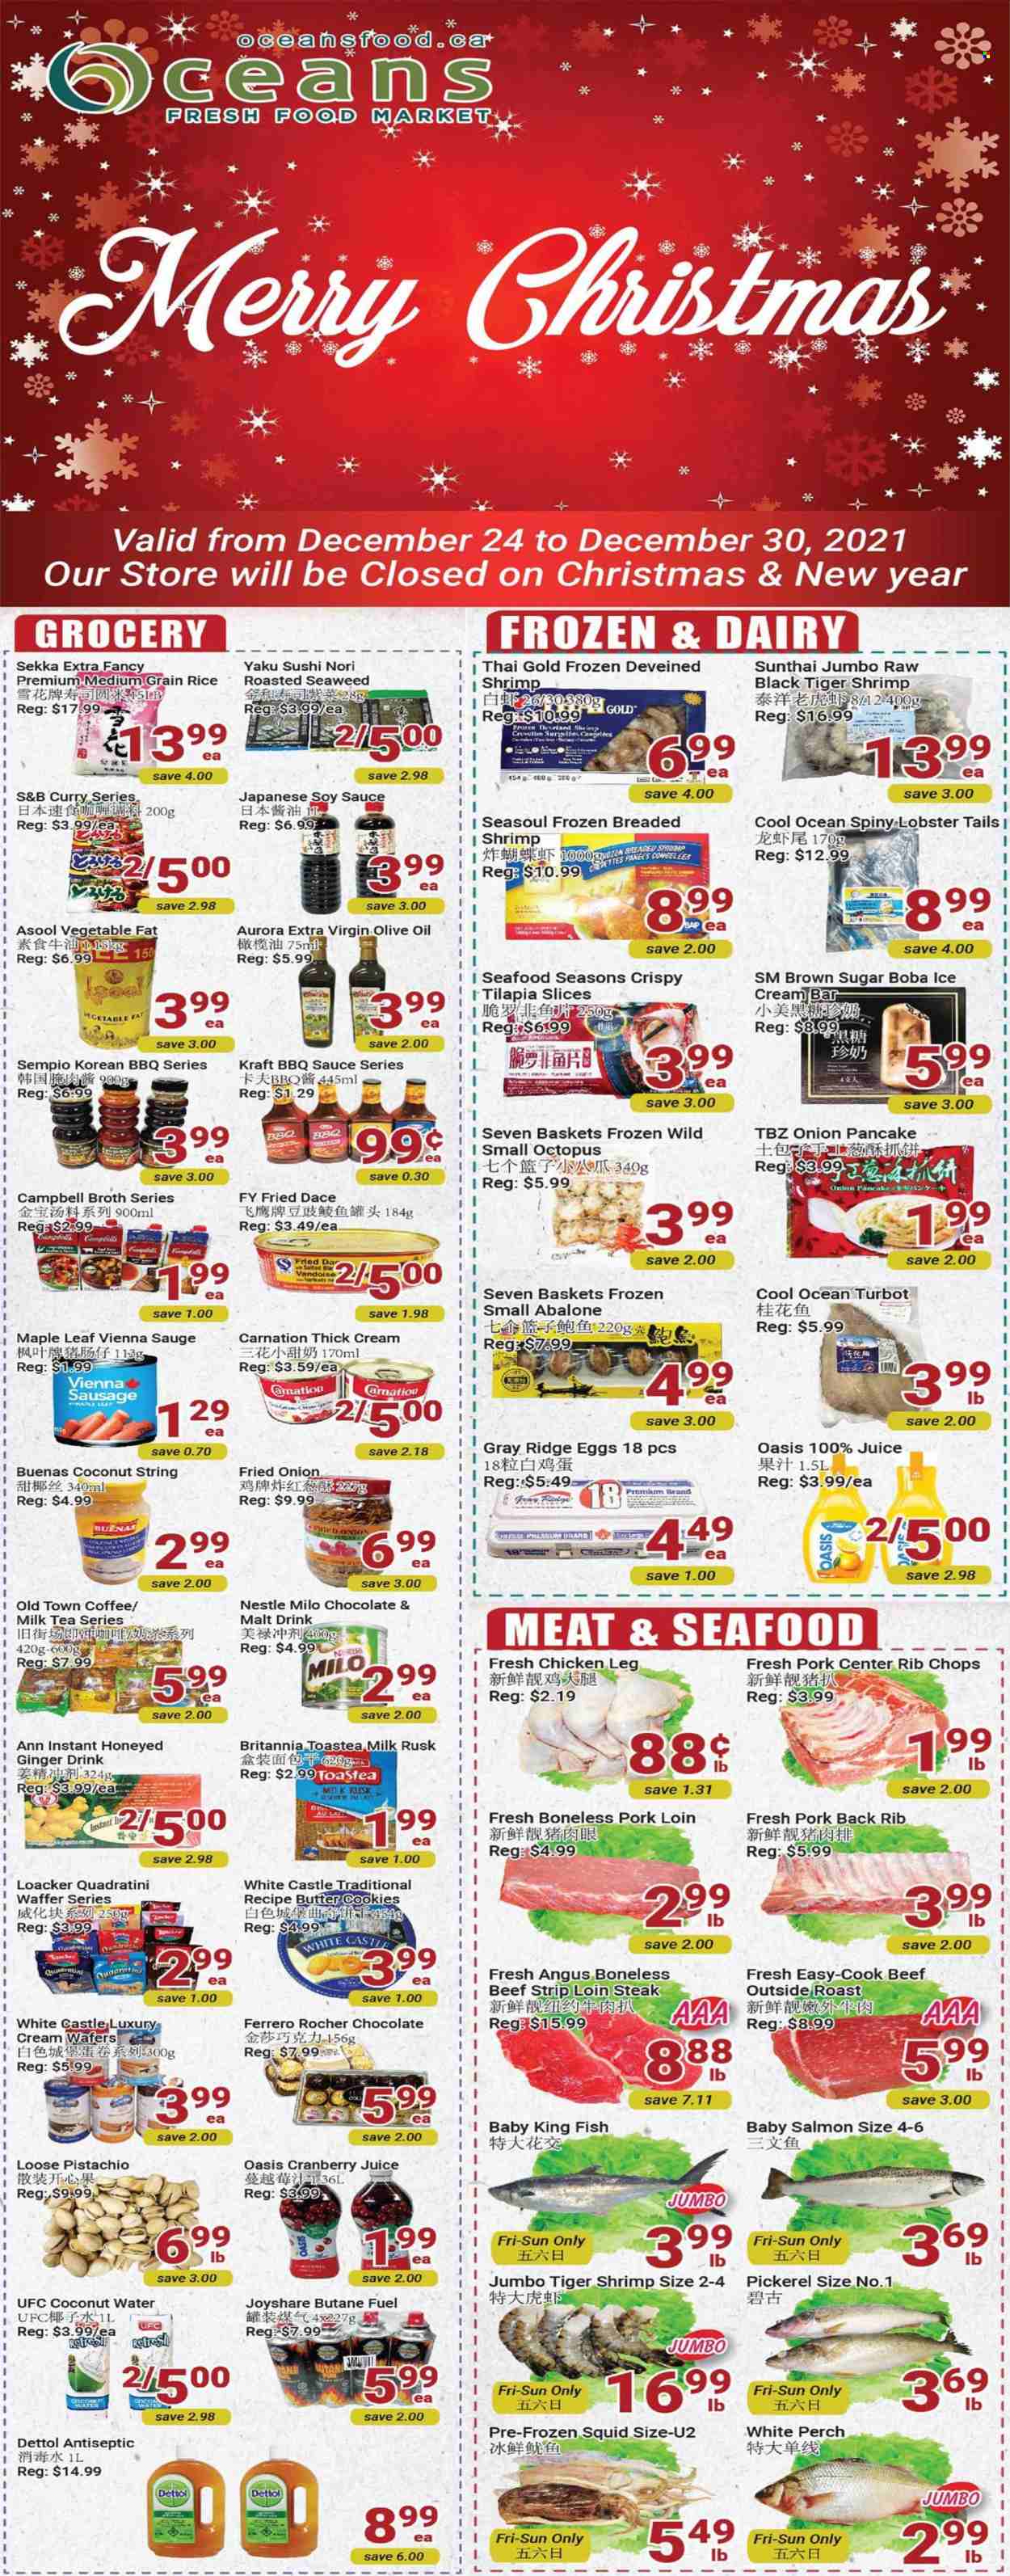 thumbnail - Oceans Flyer - December 24, 2021 - December 30, 2021 - Sales products - rusks, ginger, lobster, salmon, squid, tilapia, perch, octopus, turbot, seafood, fish, lobster tail, king fish, shrimps, abalone, walleye, sauce, pancakes, Kraft®, sausage, vienna sausage, milk, Milo, eggs, ice cream, cookies, wafers, butter cookies, cane sugar, seaweed, broth, medium grain rice, BBQ sauce, soy sauce, extra virgin olive oil, olive oil, oil, cranberry juice, juice, tea, coffee, Castle, chicken legs, pork loin, pork meat, rib chops, Nestlé, steak, Ferrero Rocher, Dettol. Page 1.